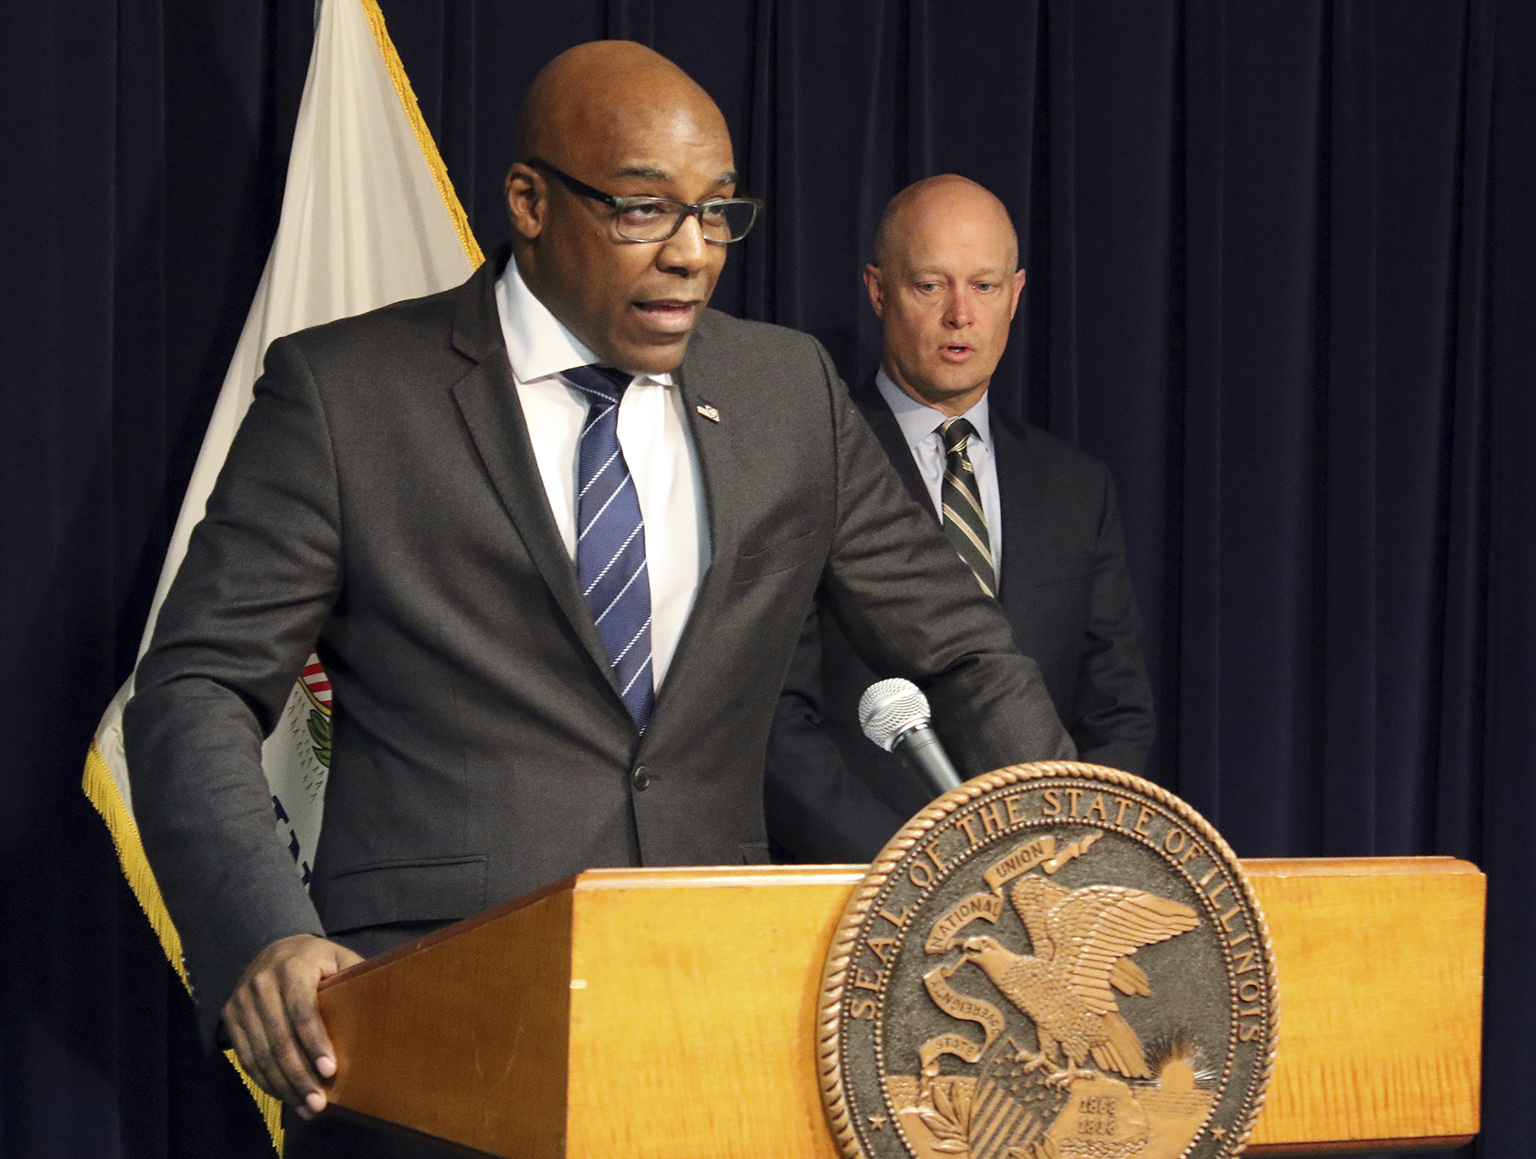 Attorney General Kwame Raoul, left, and Kane County State’s Attorney Joseph McMahon speak during a news conference Monday, Feb. 11, 2019. (AP Photo / Noreen Nasir)